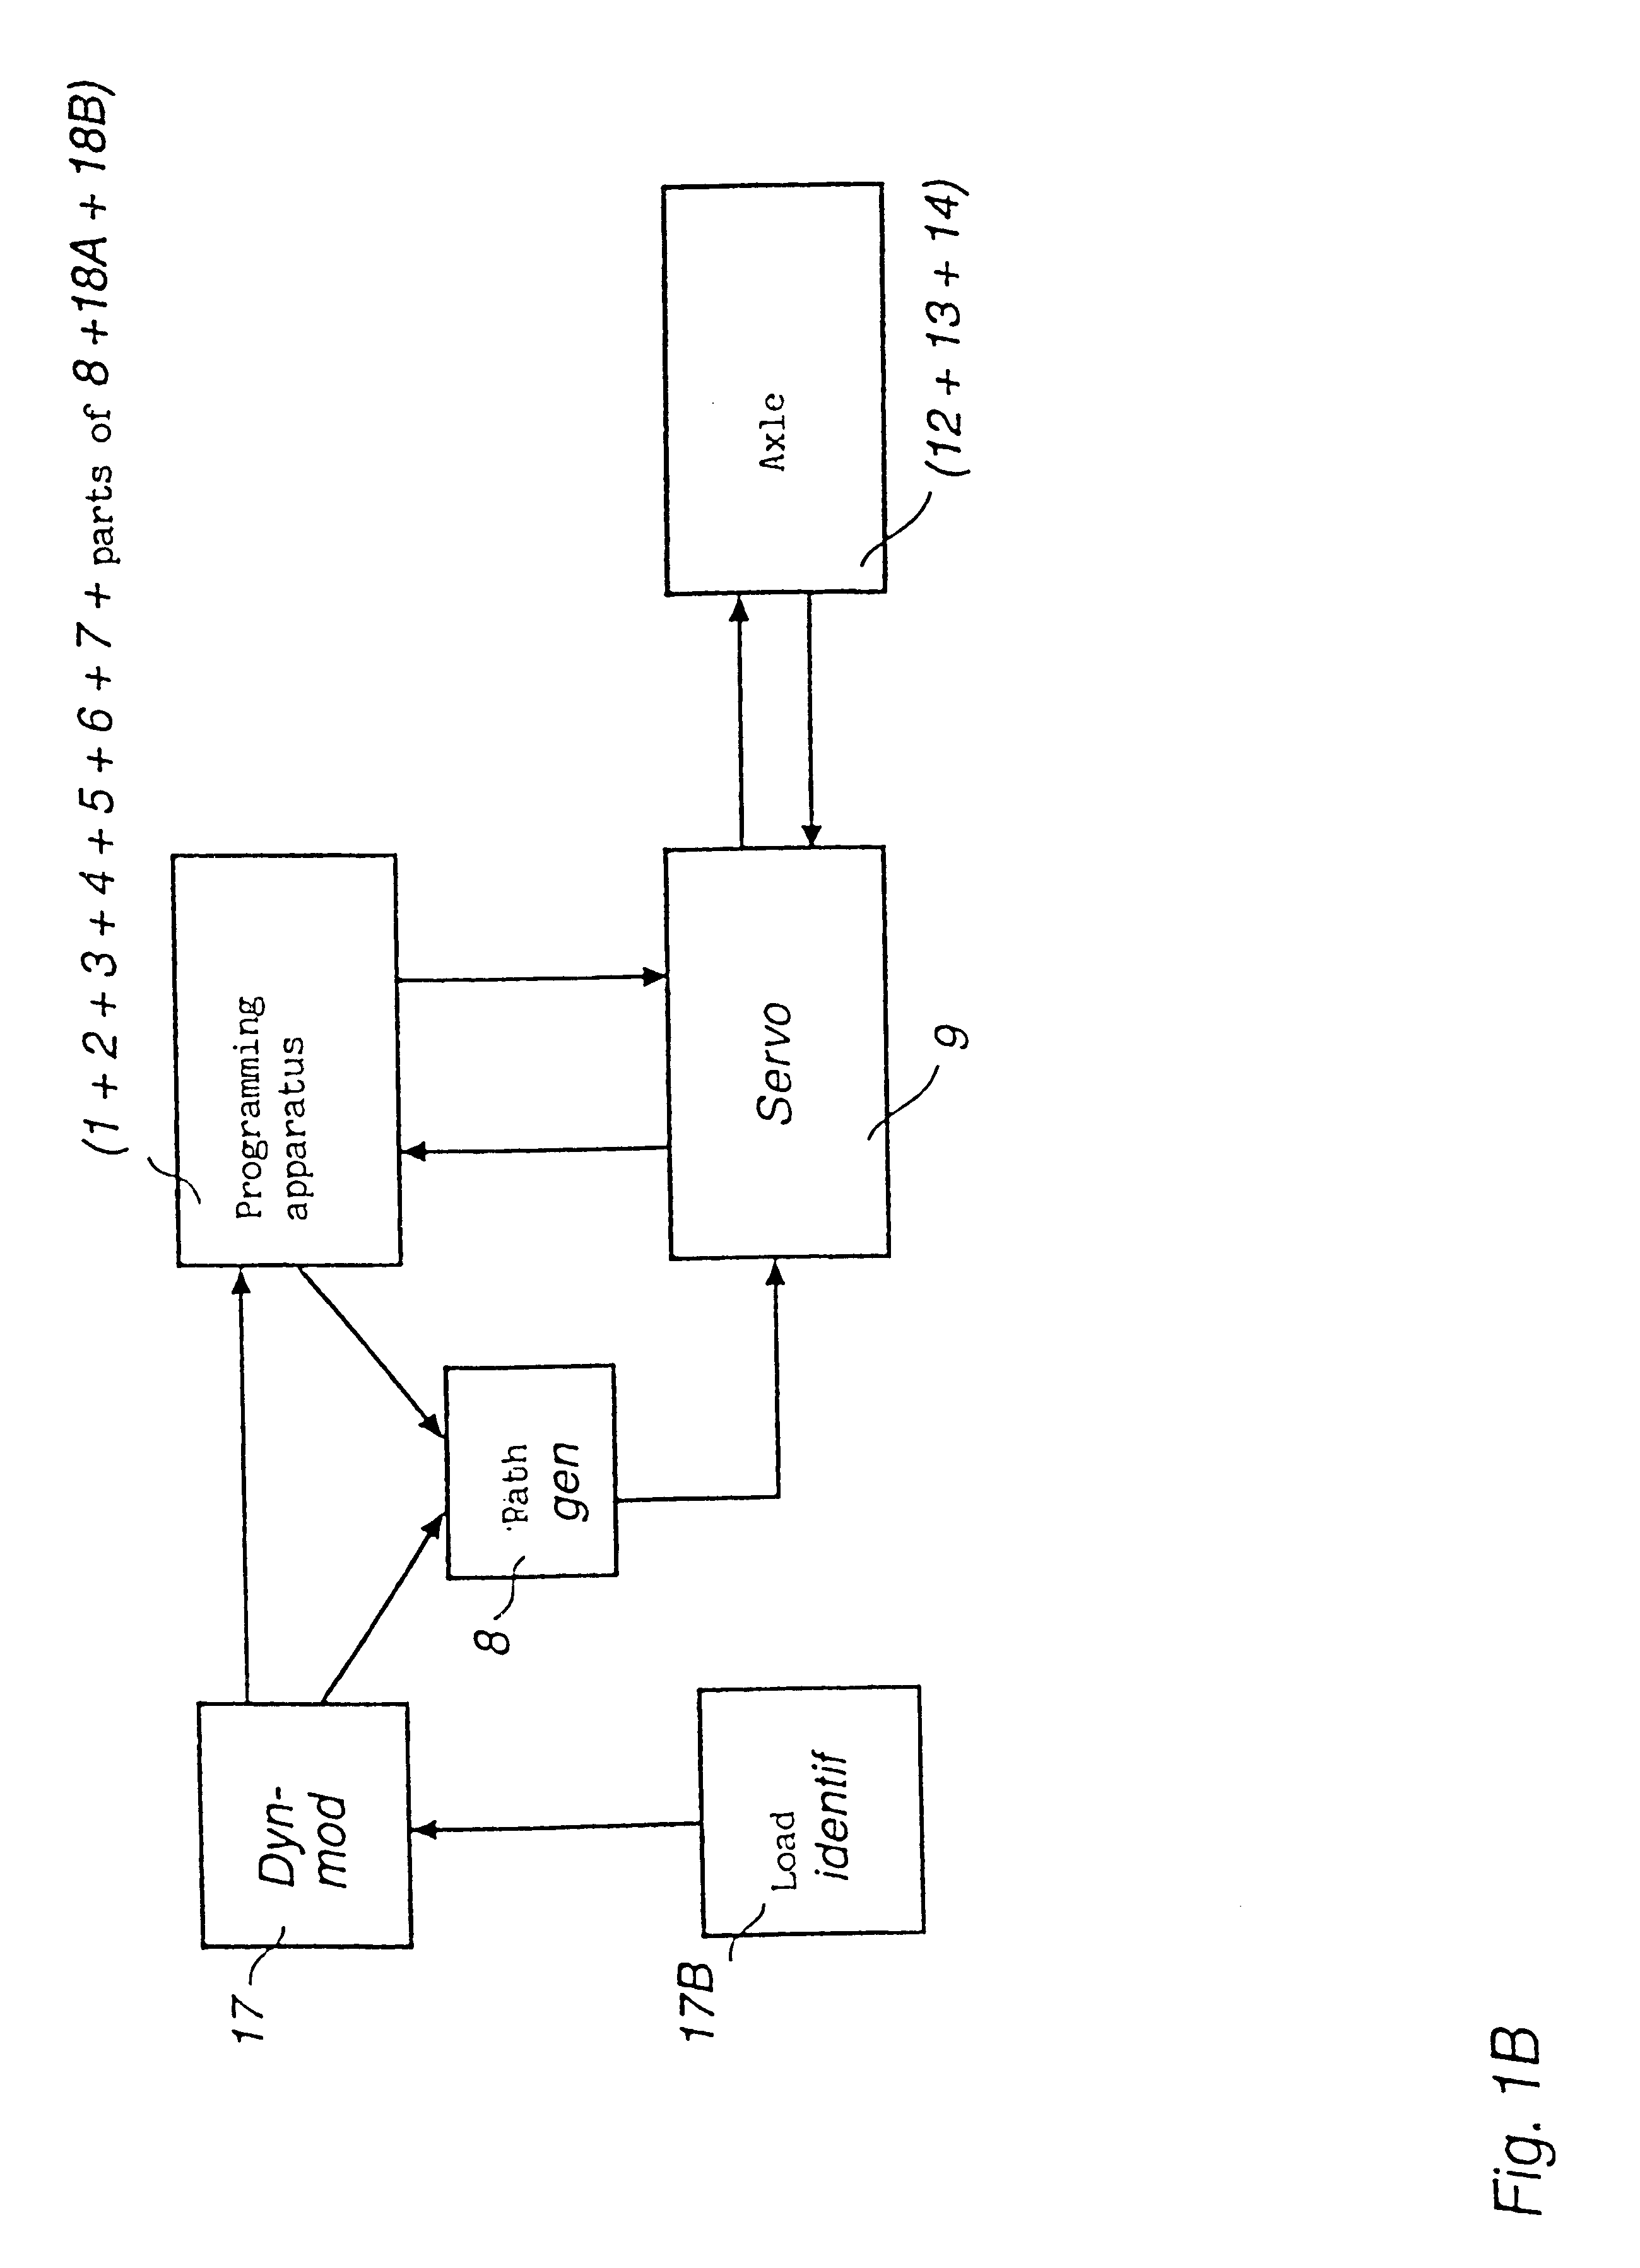 Method and apparatus for controlling an industrial robot